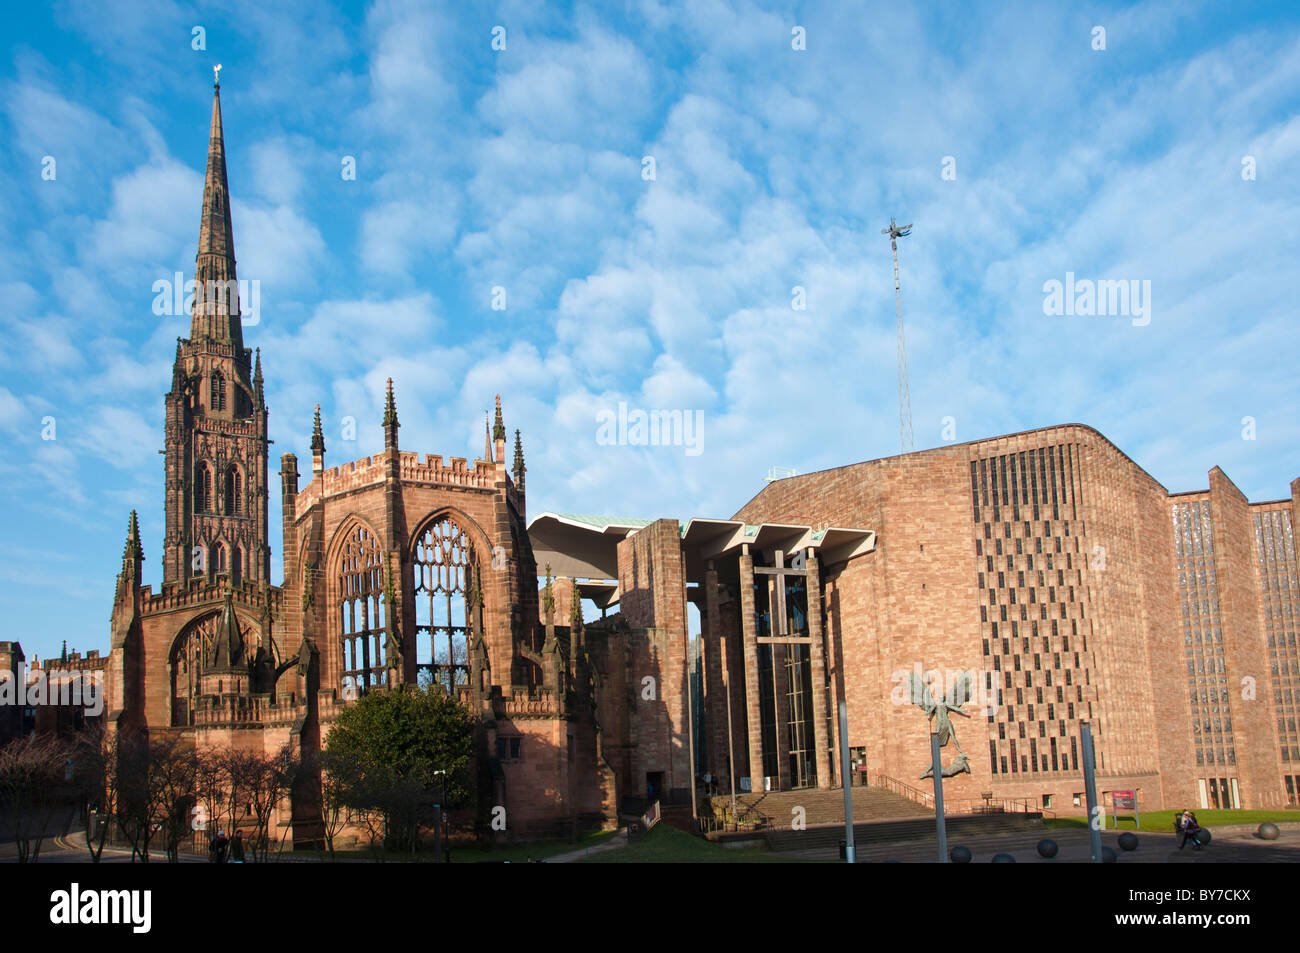 Coventry Cathedrals, new (right) and old, in Coventry, Warwickshire, Midlands England, United Kingdom Stock Photo